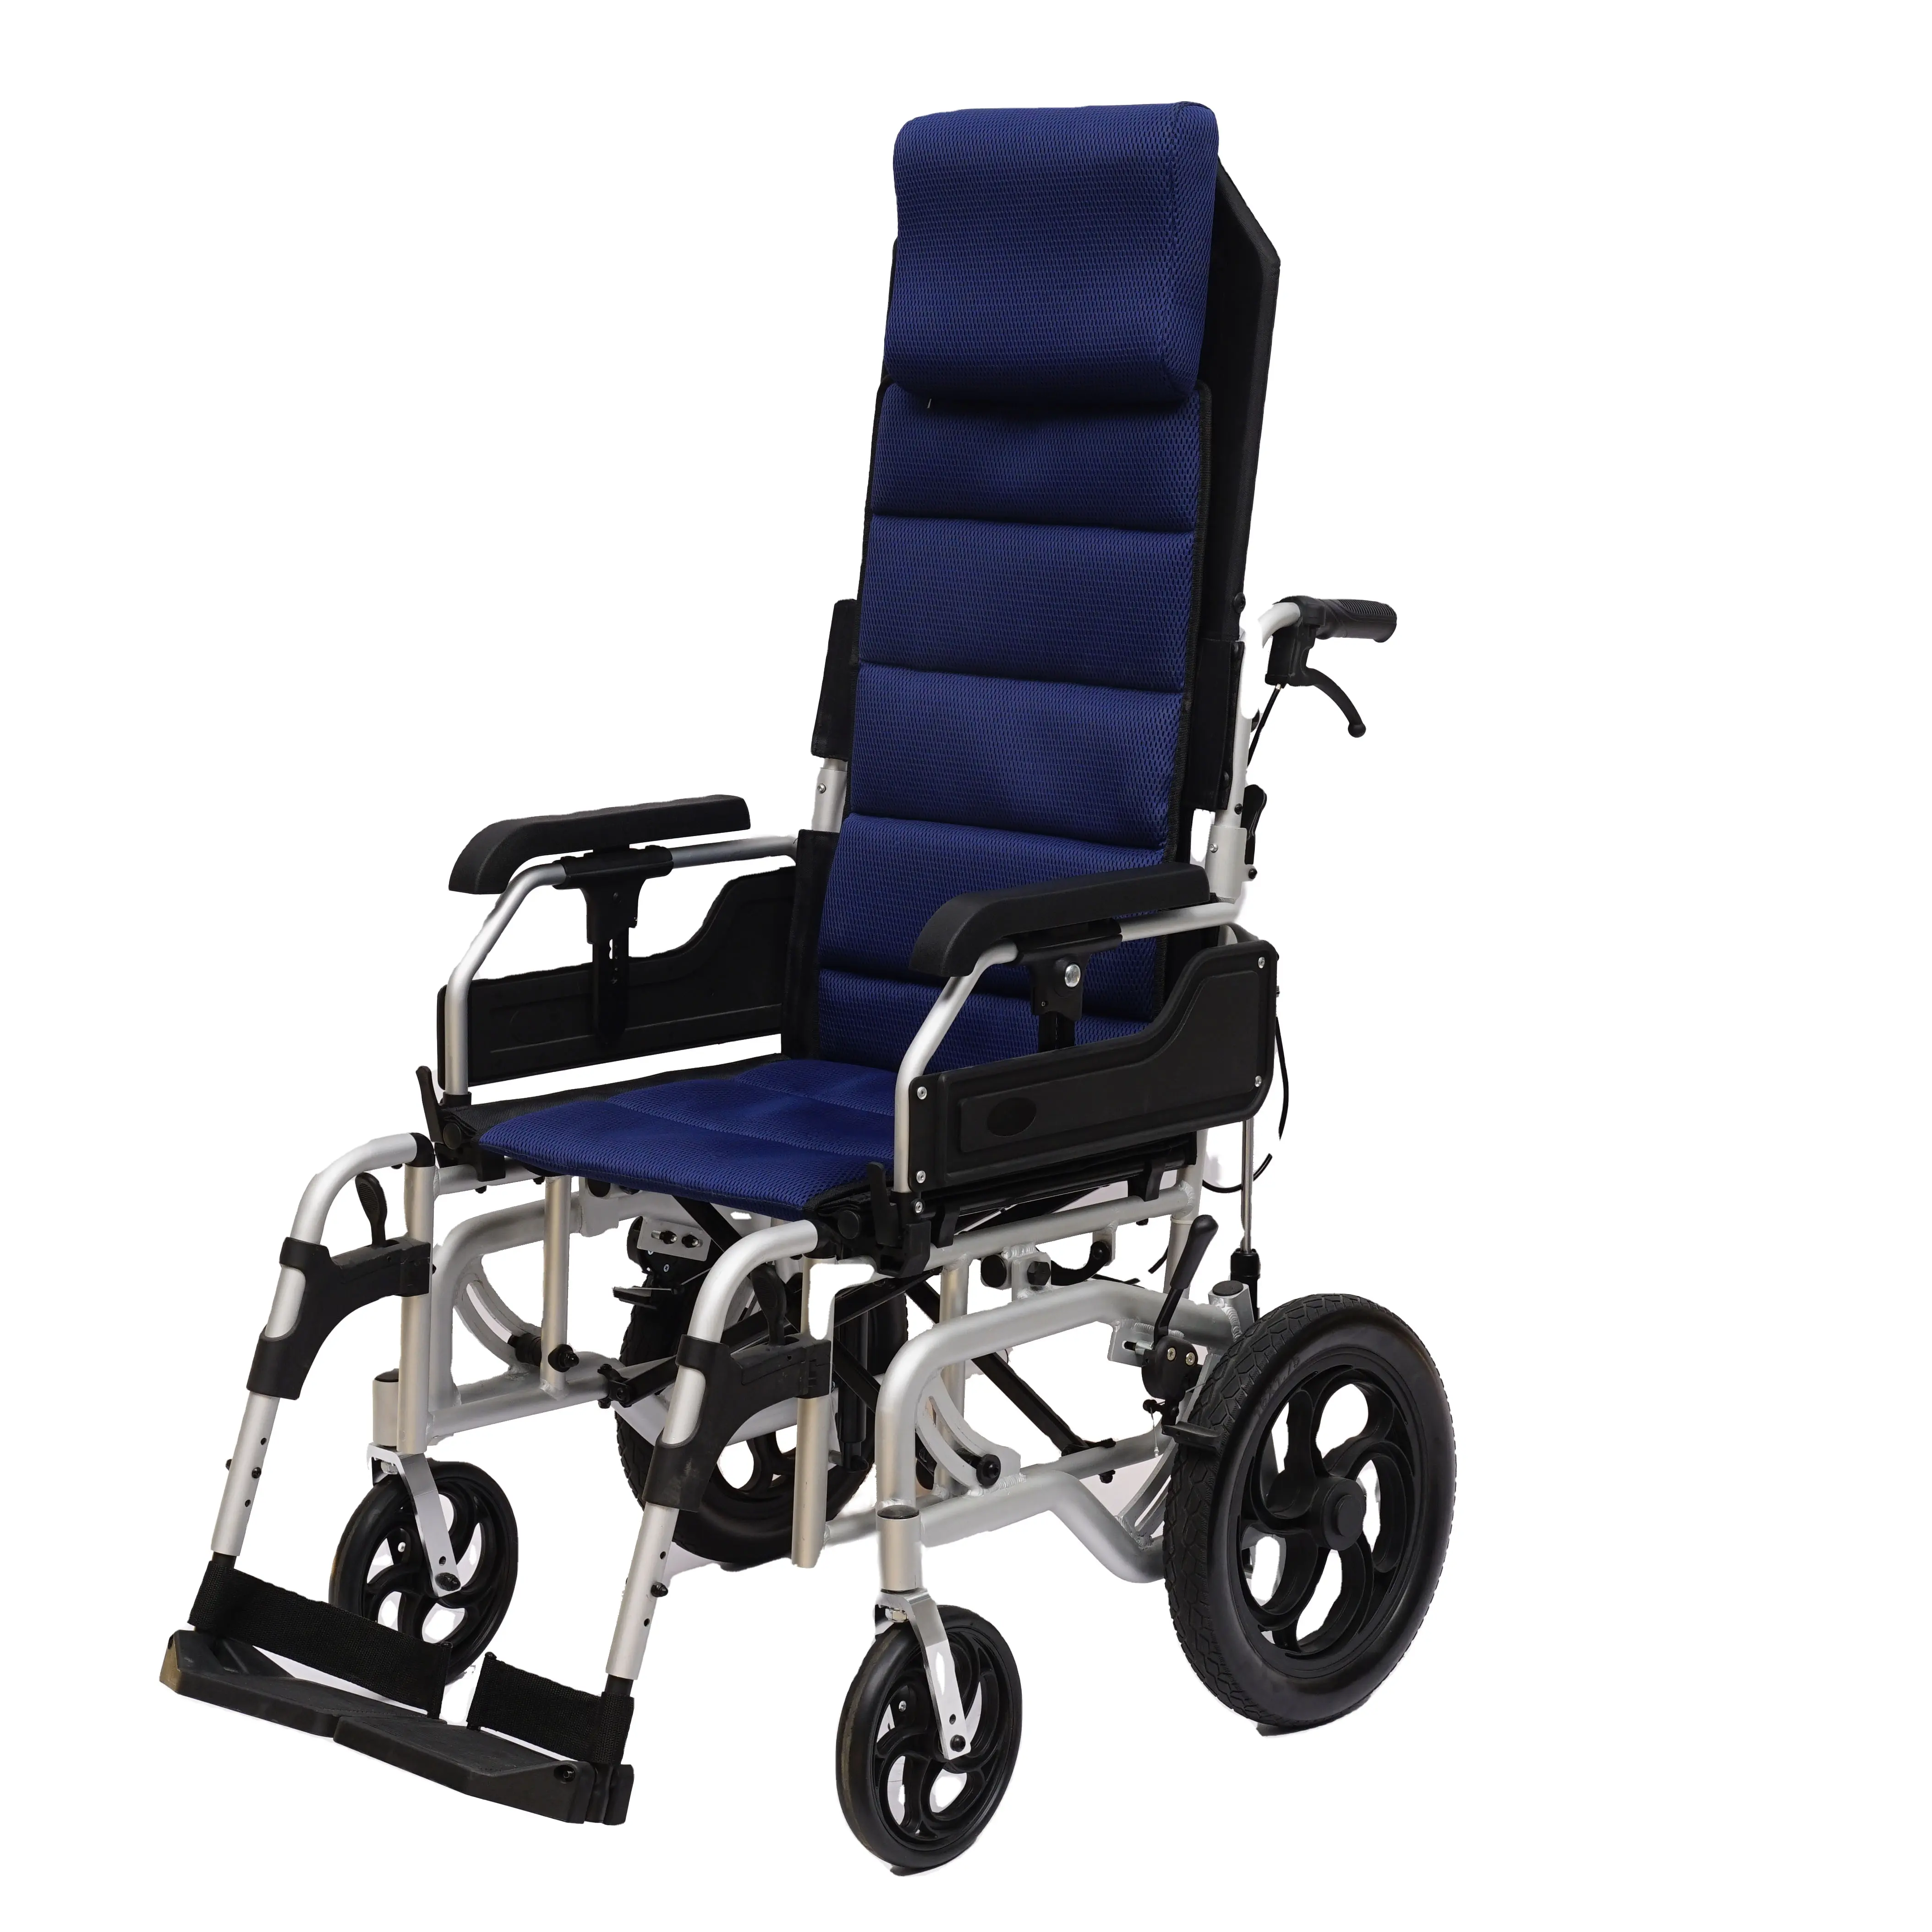 Massage chair manual wheelchair cushion for disabled used mobility prices aluminum wheelchair